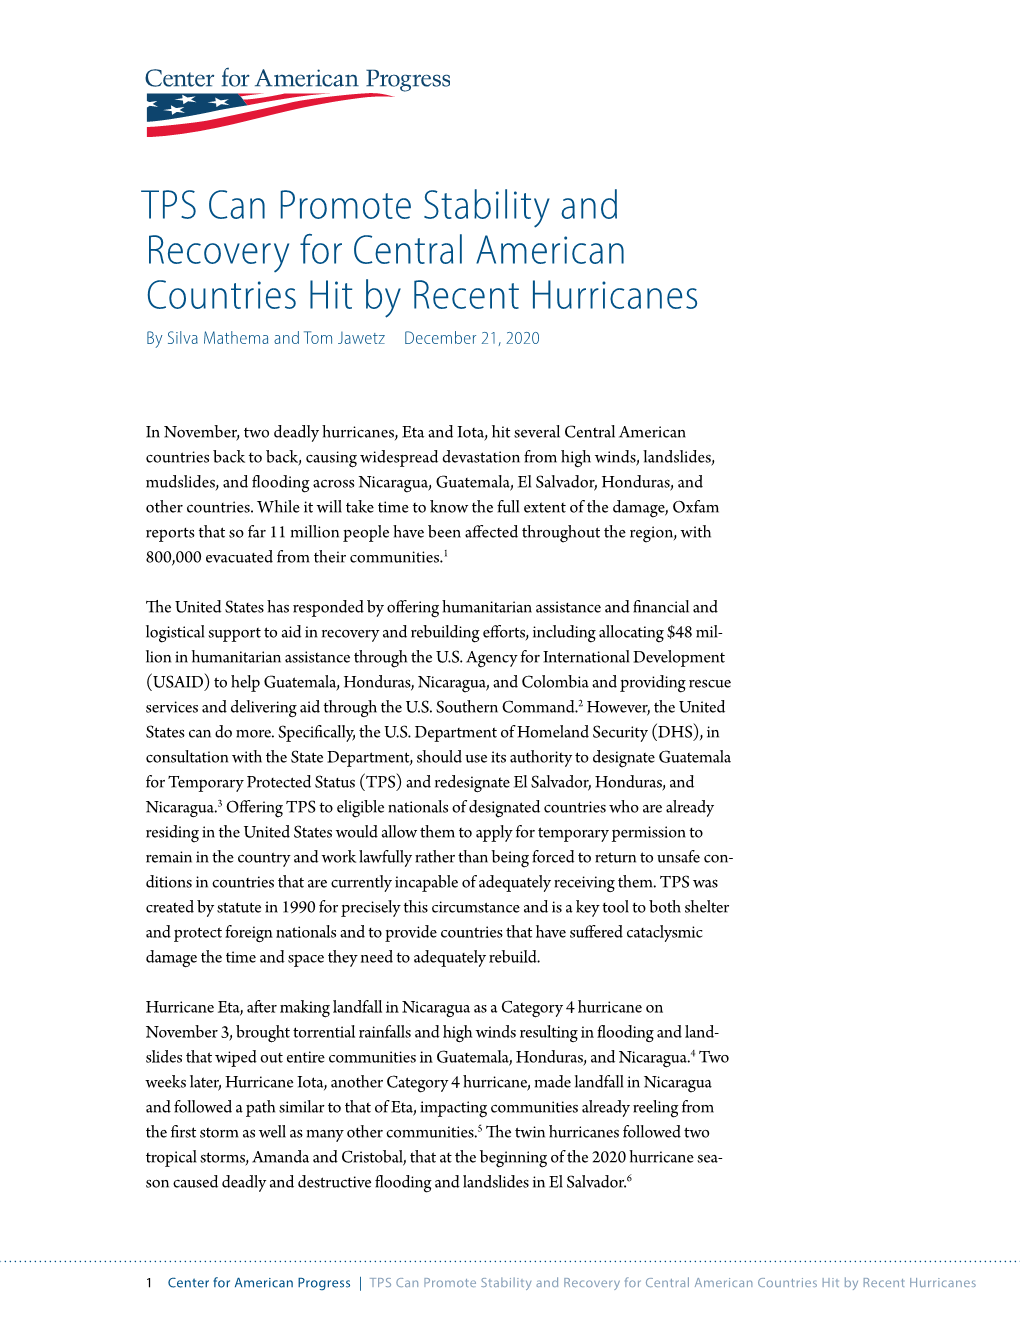 TPS Can Promote Stability and Recovery for Central American Countries Hit by Recent Hurricanes by Silva Mathema and Tom Jawetz December 21, 2020